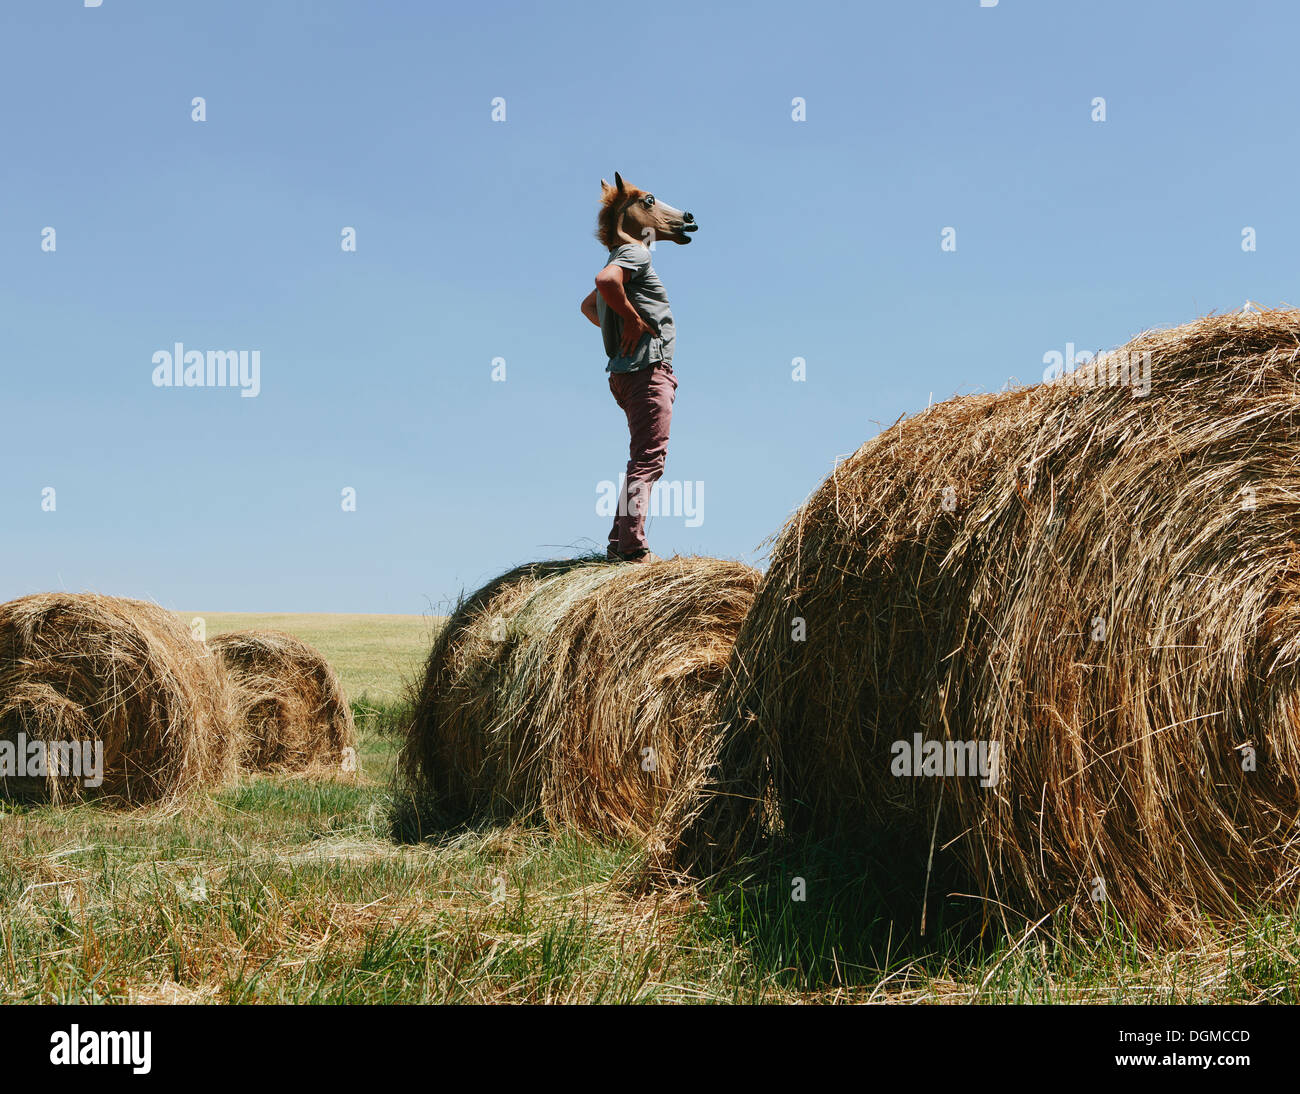 A man wearing a horse mask, standing on a hay bale, looking out over the landscape. Stock Photo